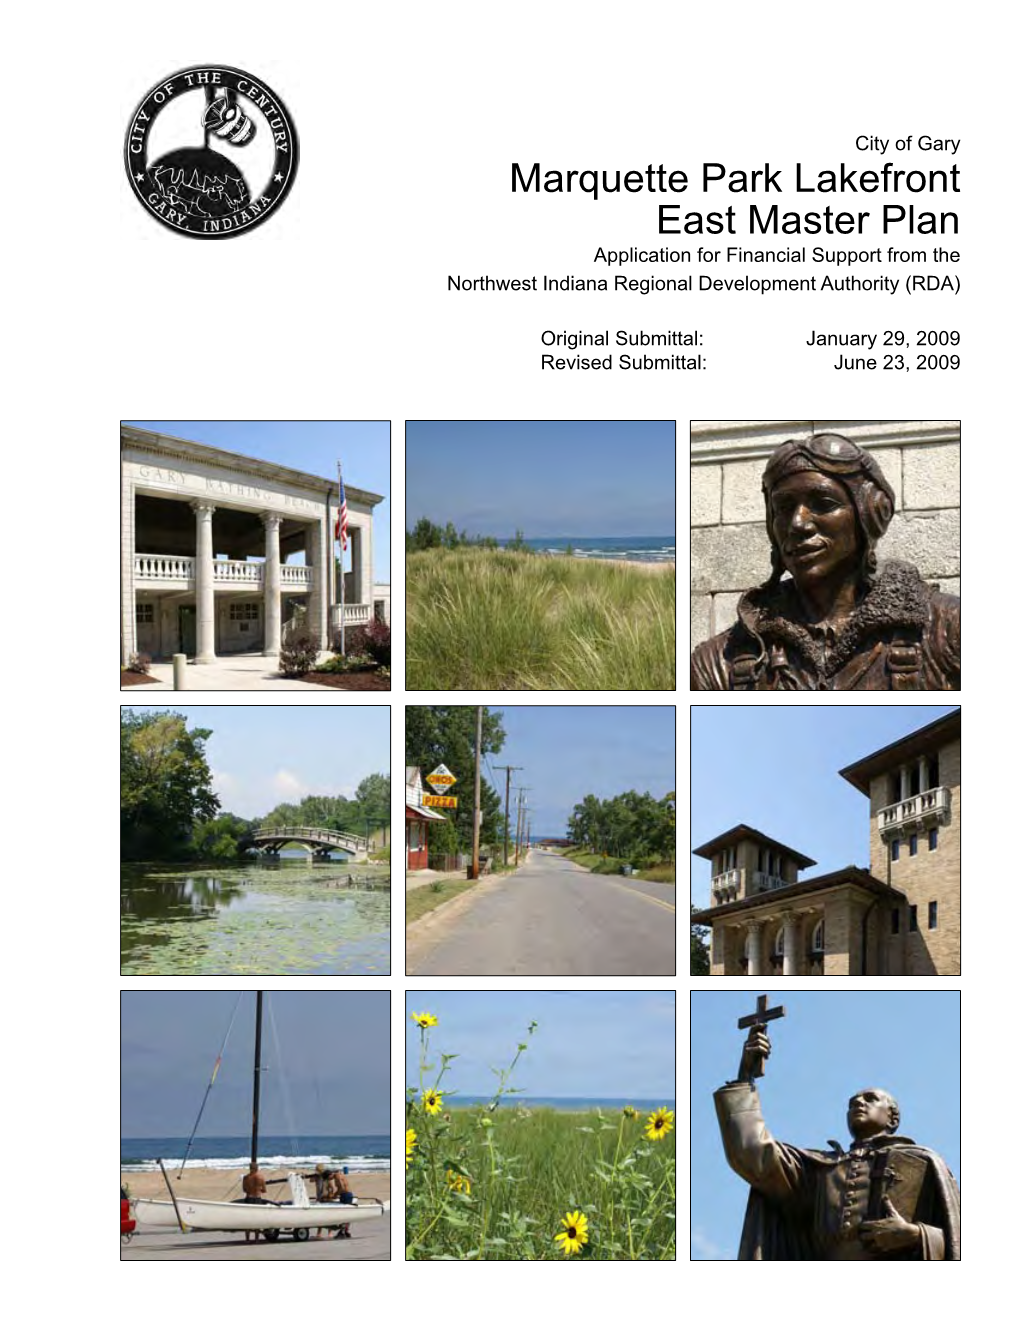 Marquette Park Lakefront East Master Plan Application for Financial Support from the Northwest Indiana Regional Development Authority (RDA)